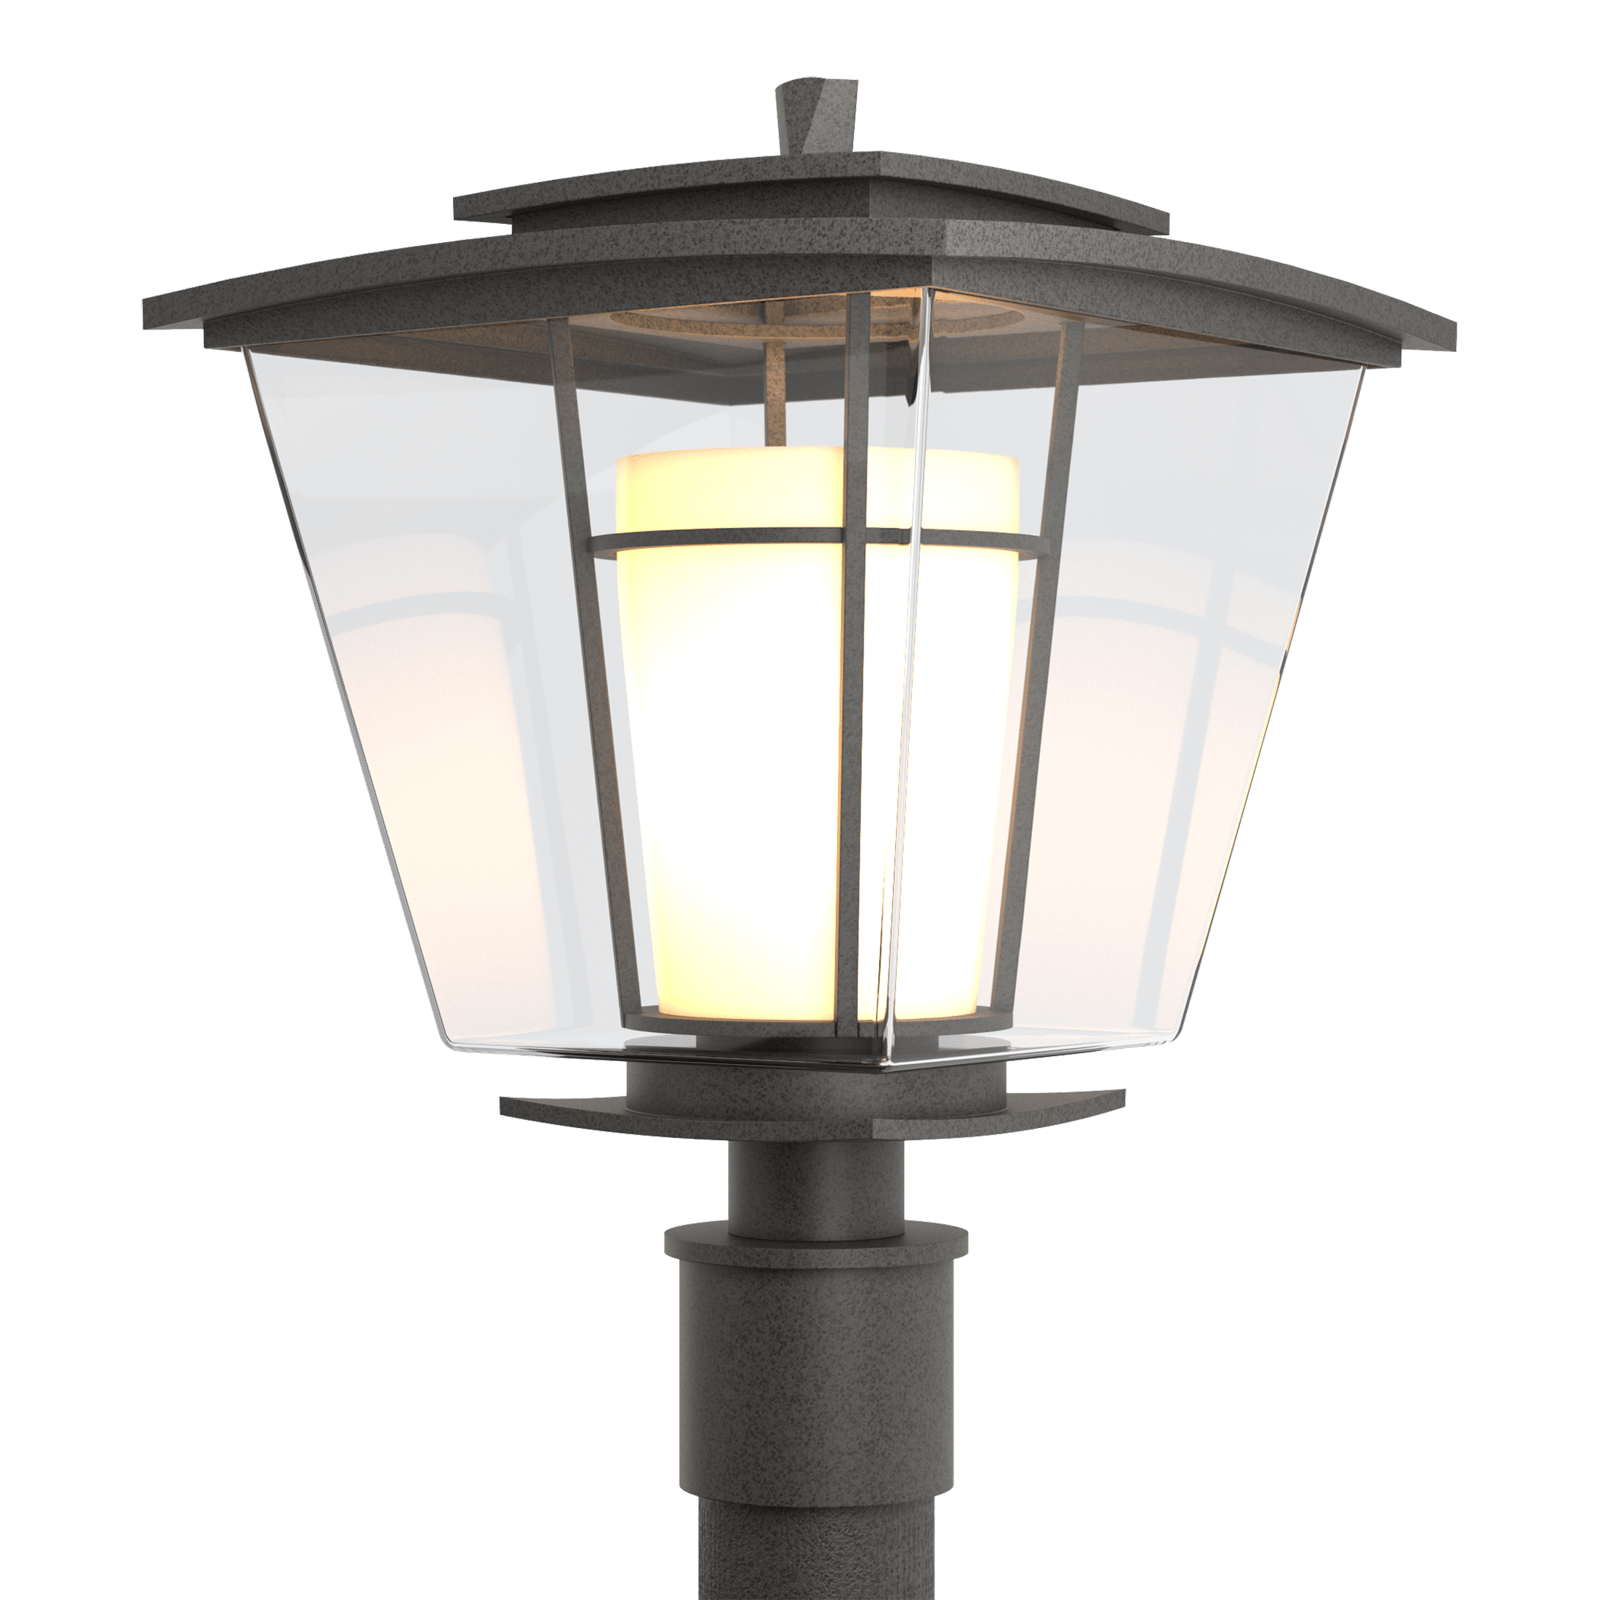 Hubbardton Forge Beacon Hall Outdoor Post Light Outdoor l Post/Pier Mounts Hubbardton Forge Coastal Natural Iron Clear Glass with Opal Diffuser (ZU) 